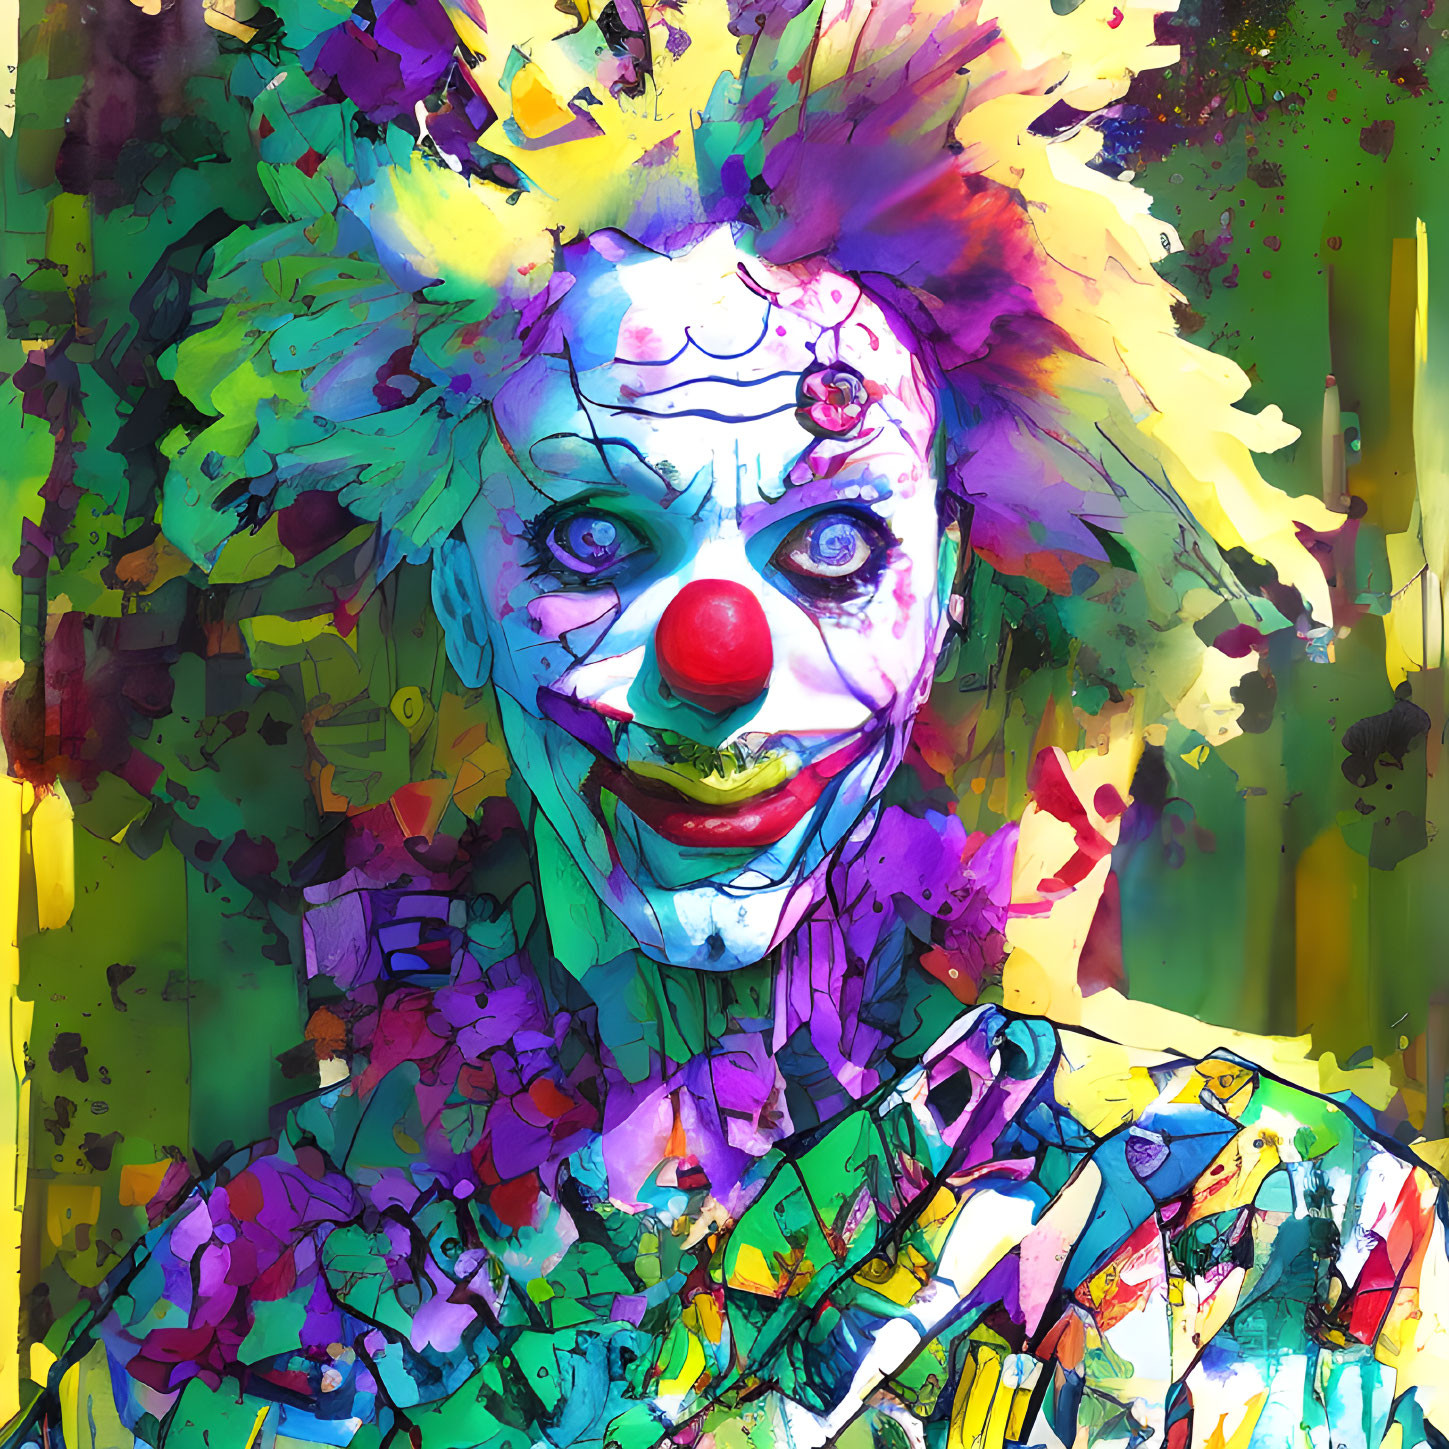 Vibrant abstract painting of a clown with yellow hair and red nose